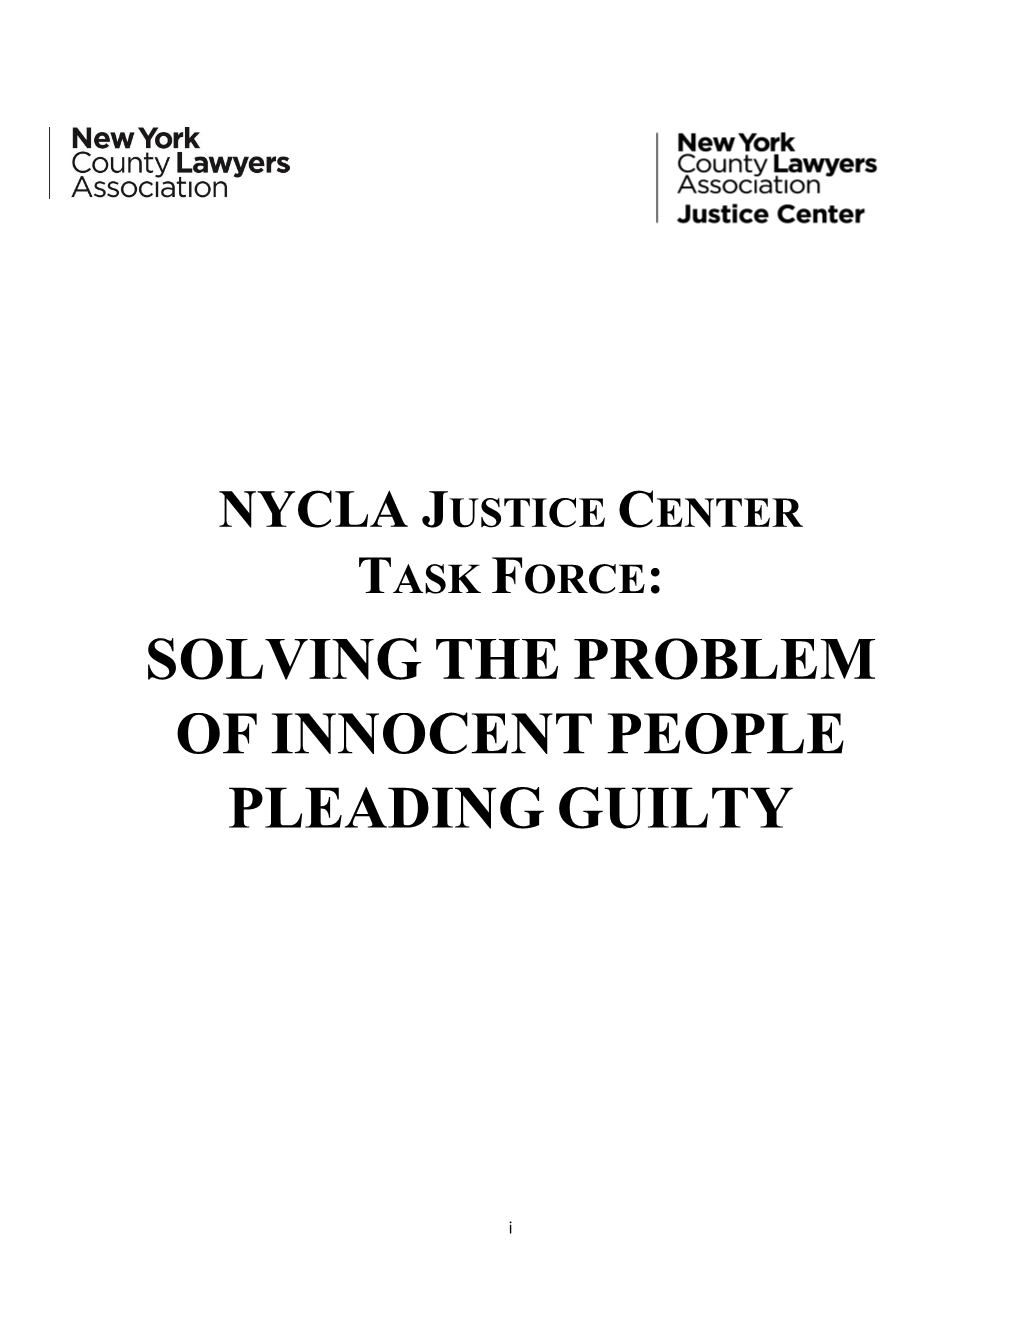 Solving the Problem of Innocent People Pleading Guilty